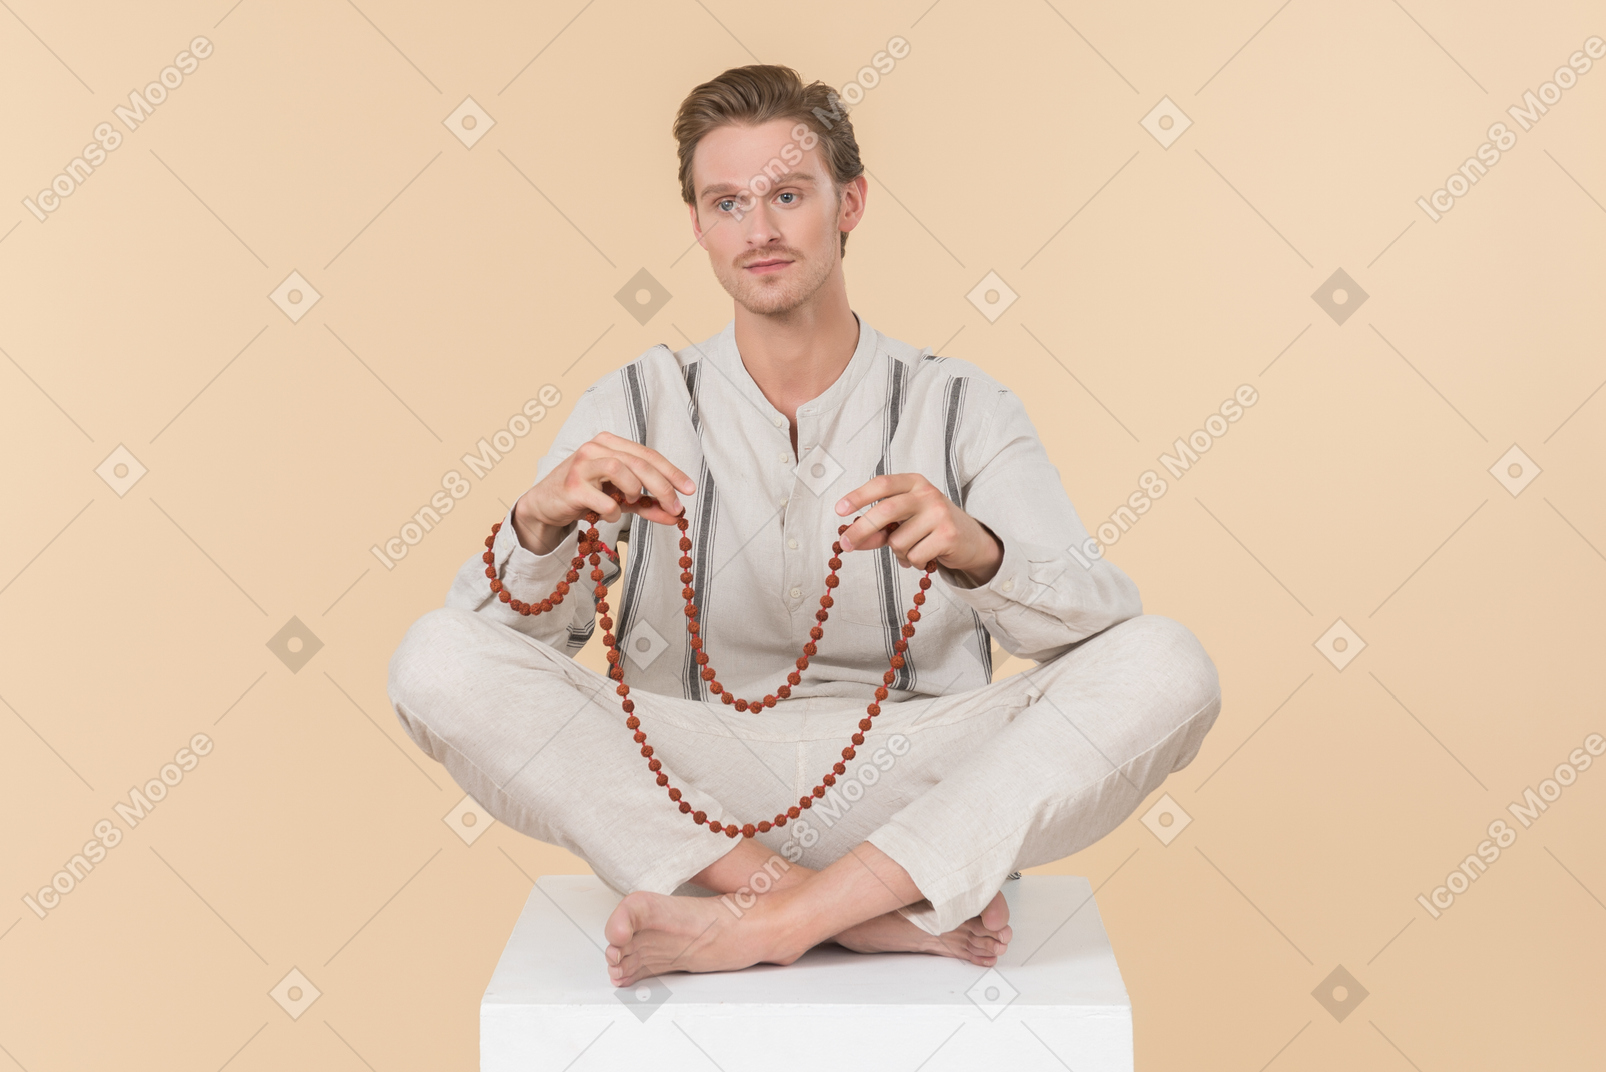 Young caucasian man sitting in lotus position and holding a necklace